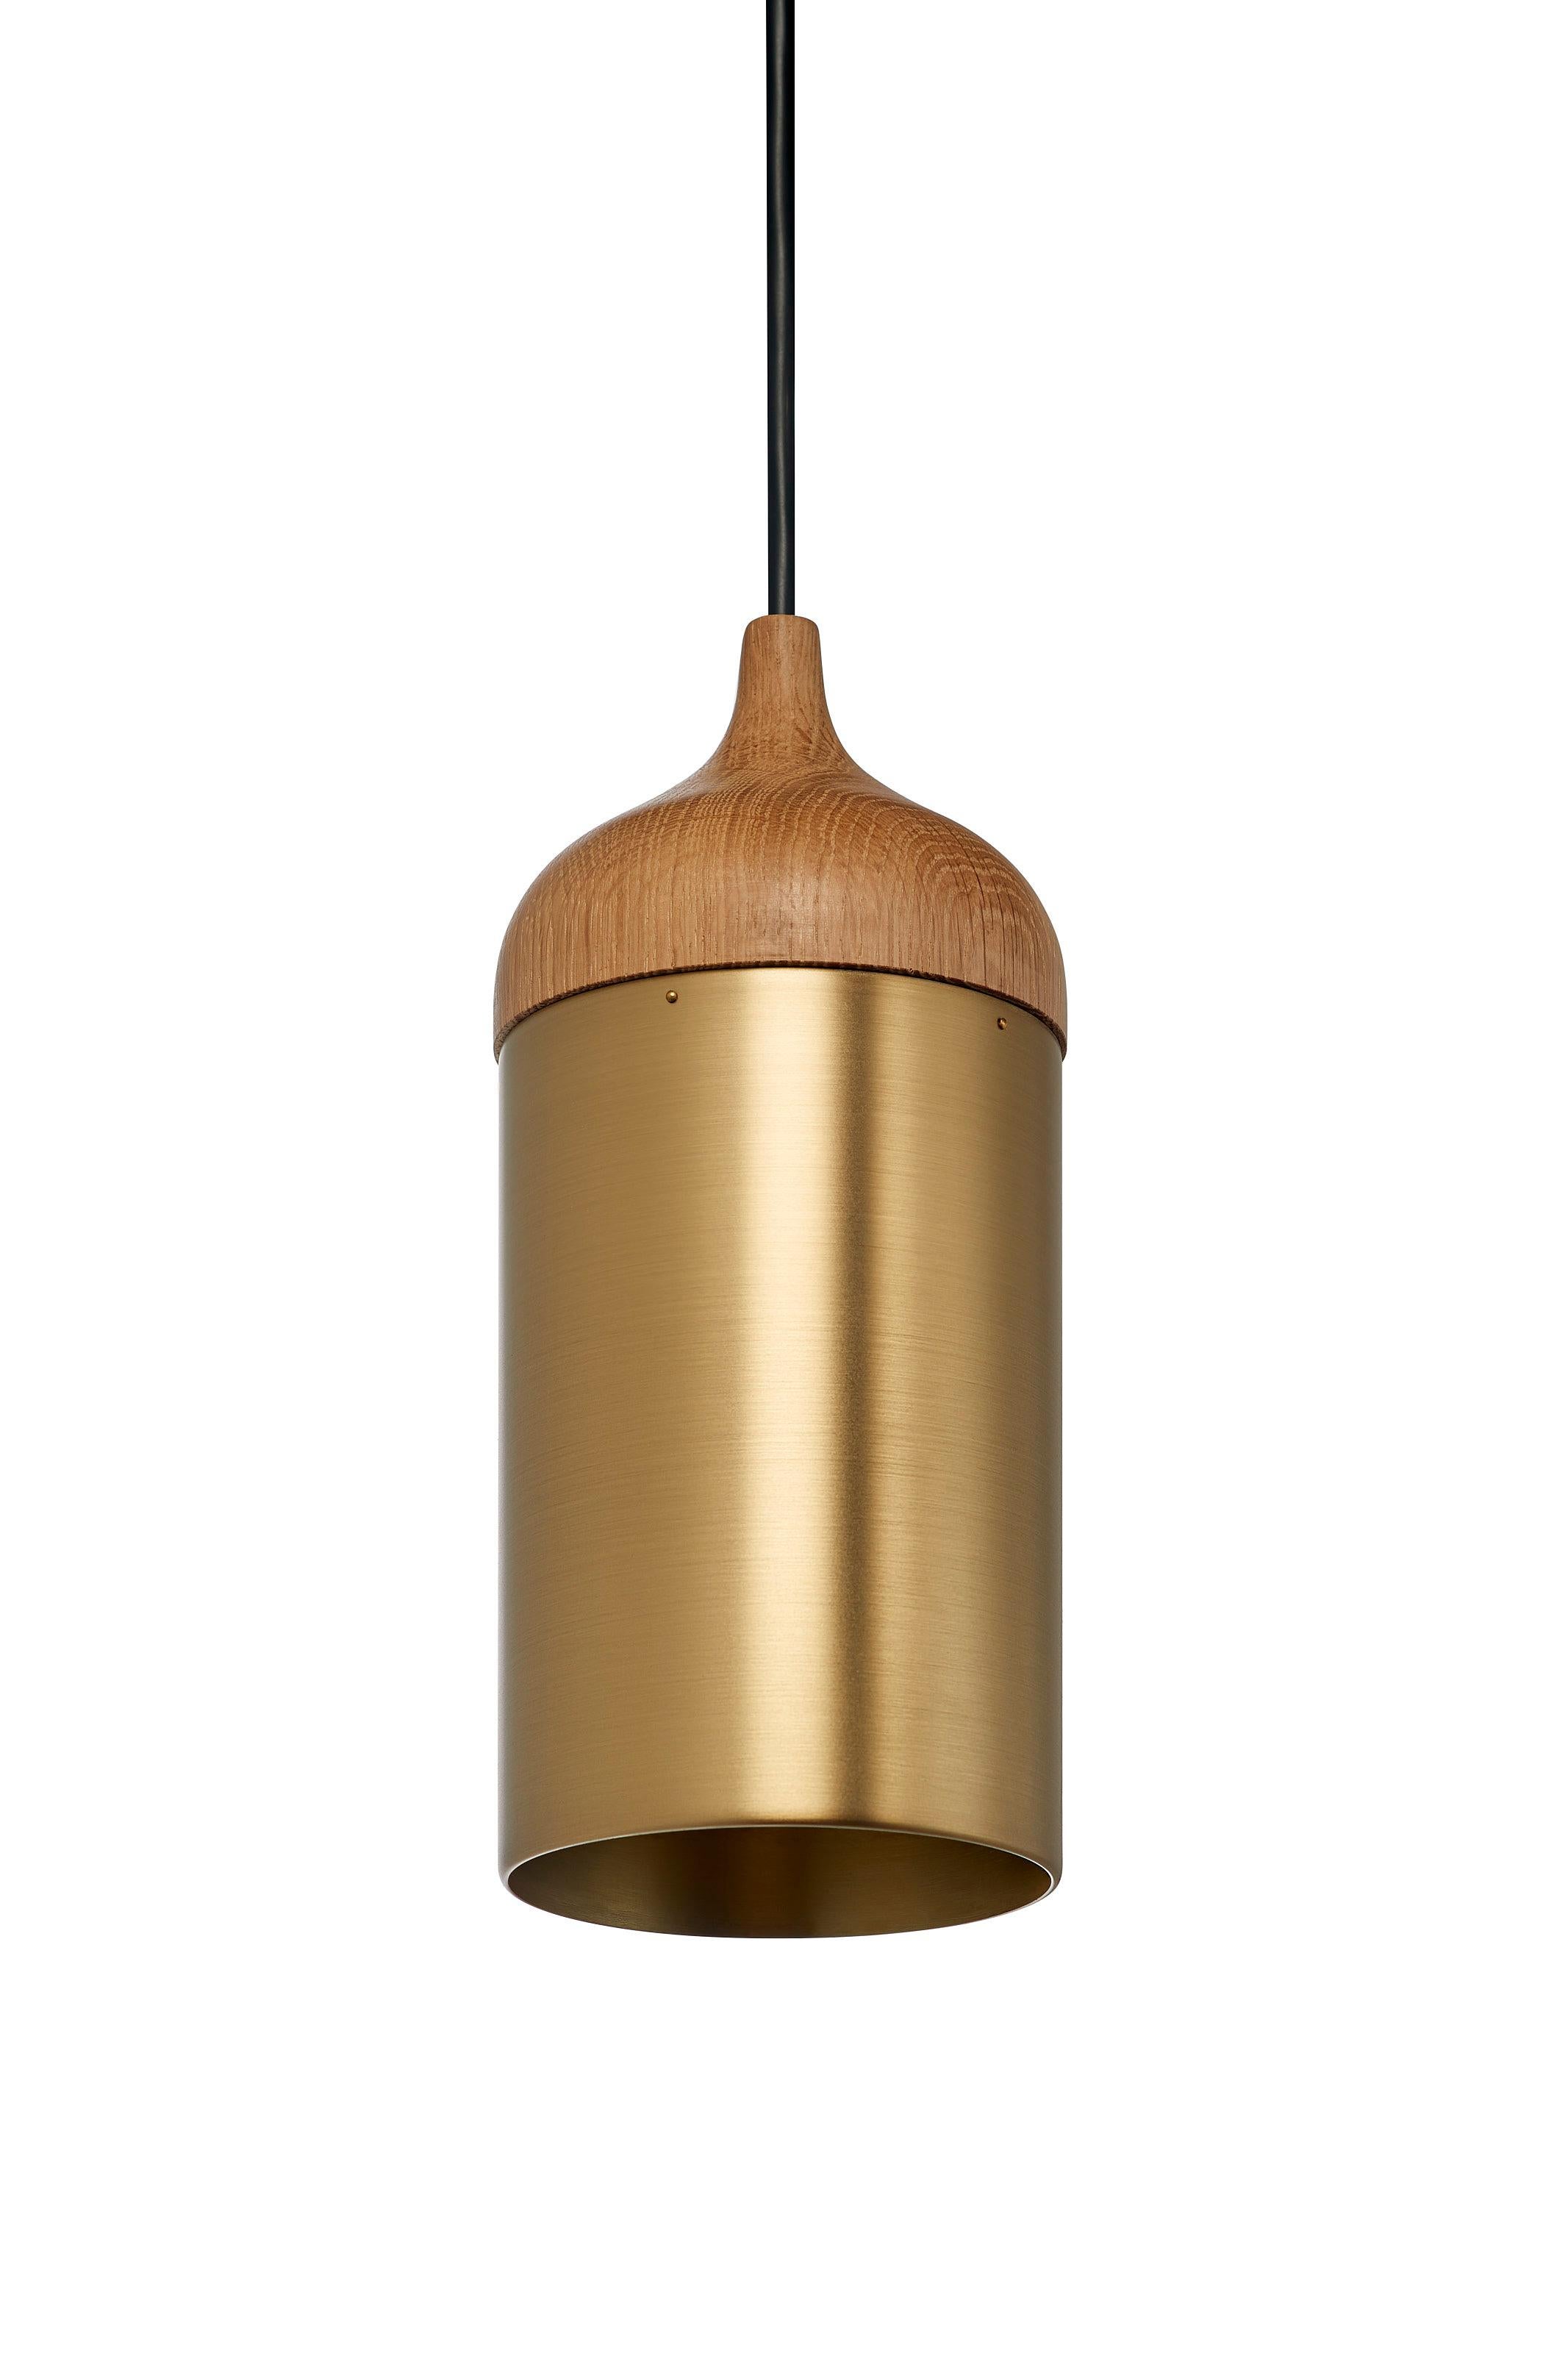 Our well known copper lamp is also available in 2mm thick solid brass. The parts are shaped on the same type of machine, the lathe. Brass Lamp is available with three different wood types. 

Brushed solid brass - lacquered
Oak, walnut or